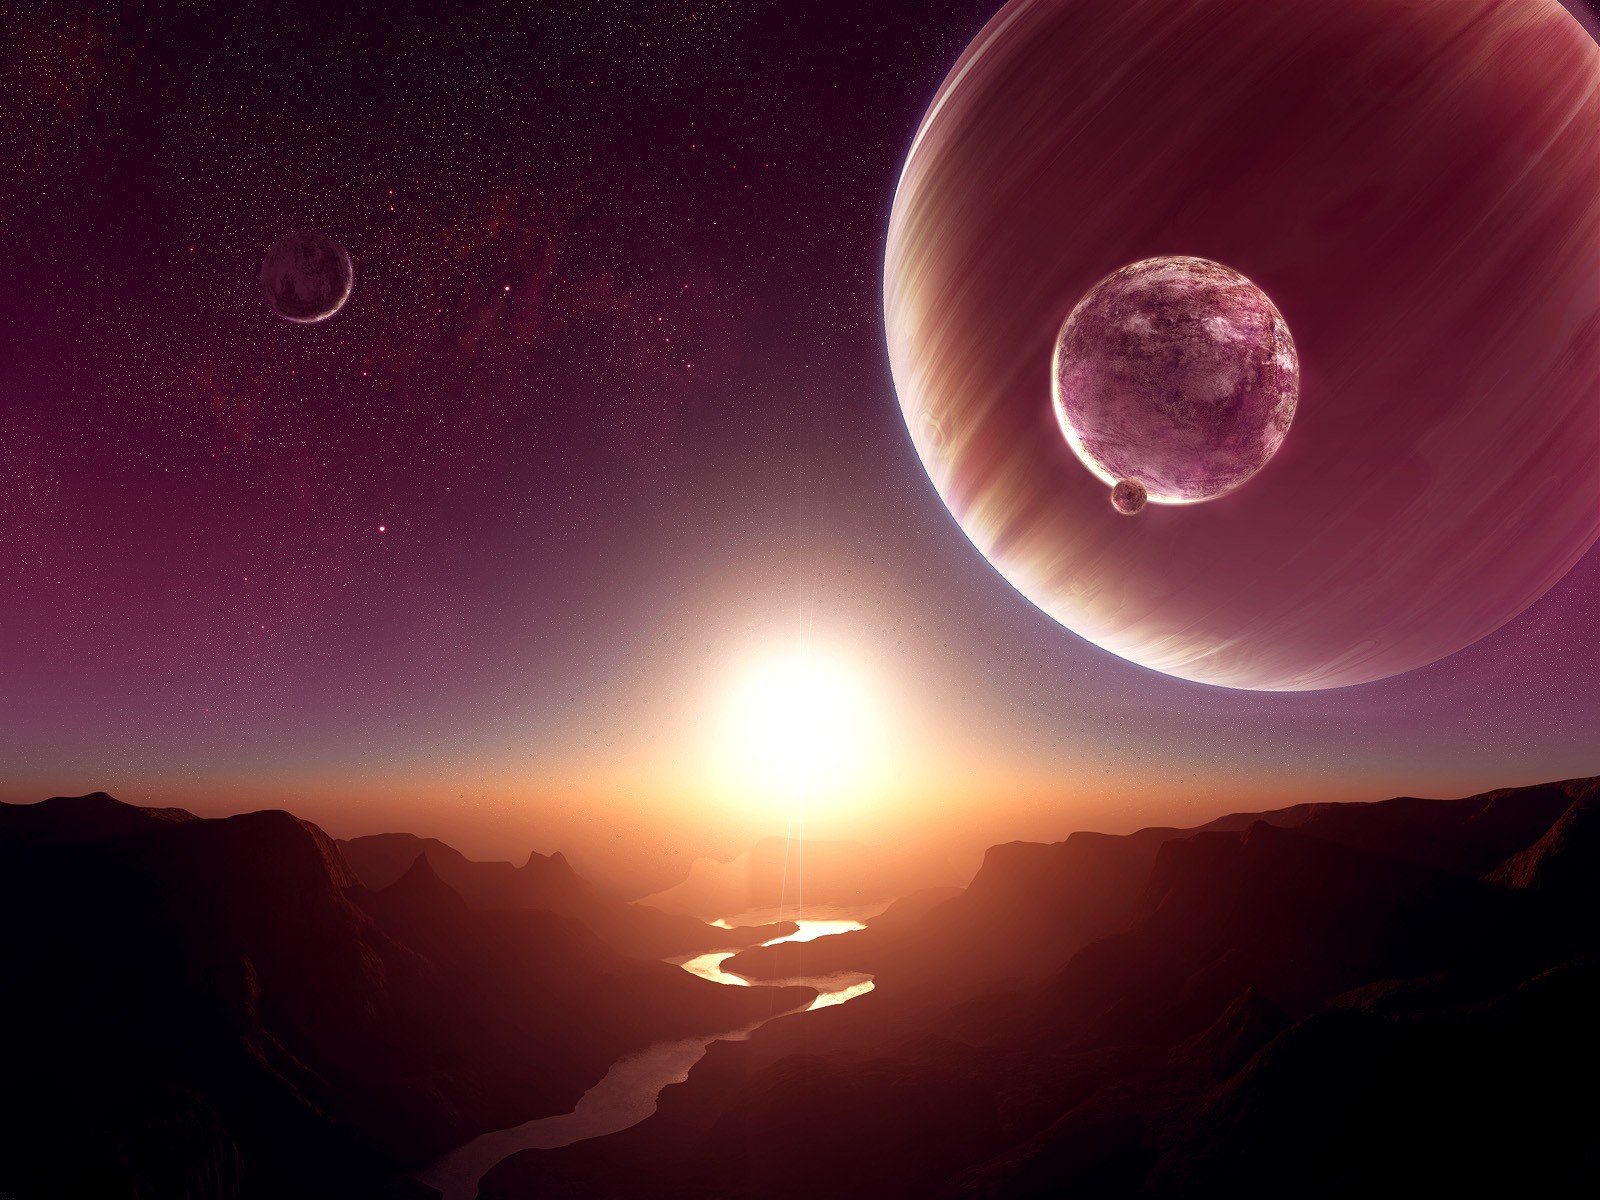 outer, Space, Horizon, Planets, Science, Fiction, Rivers, Moons Wallpaper